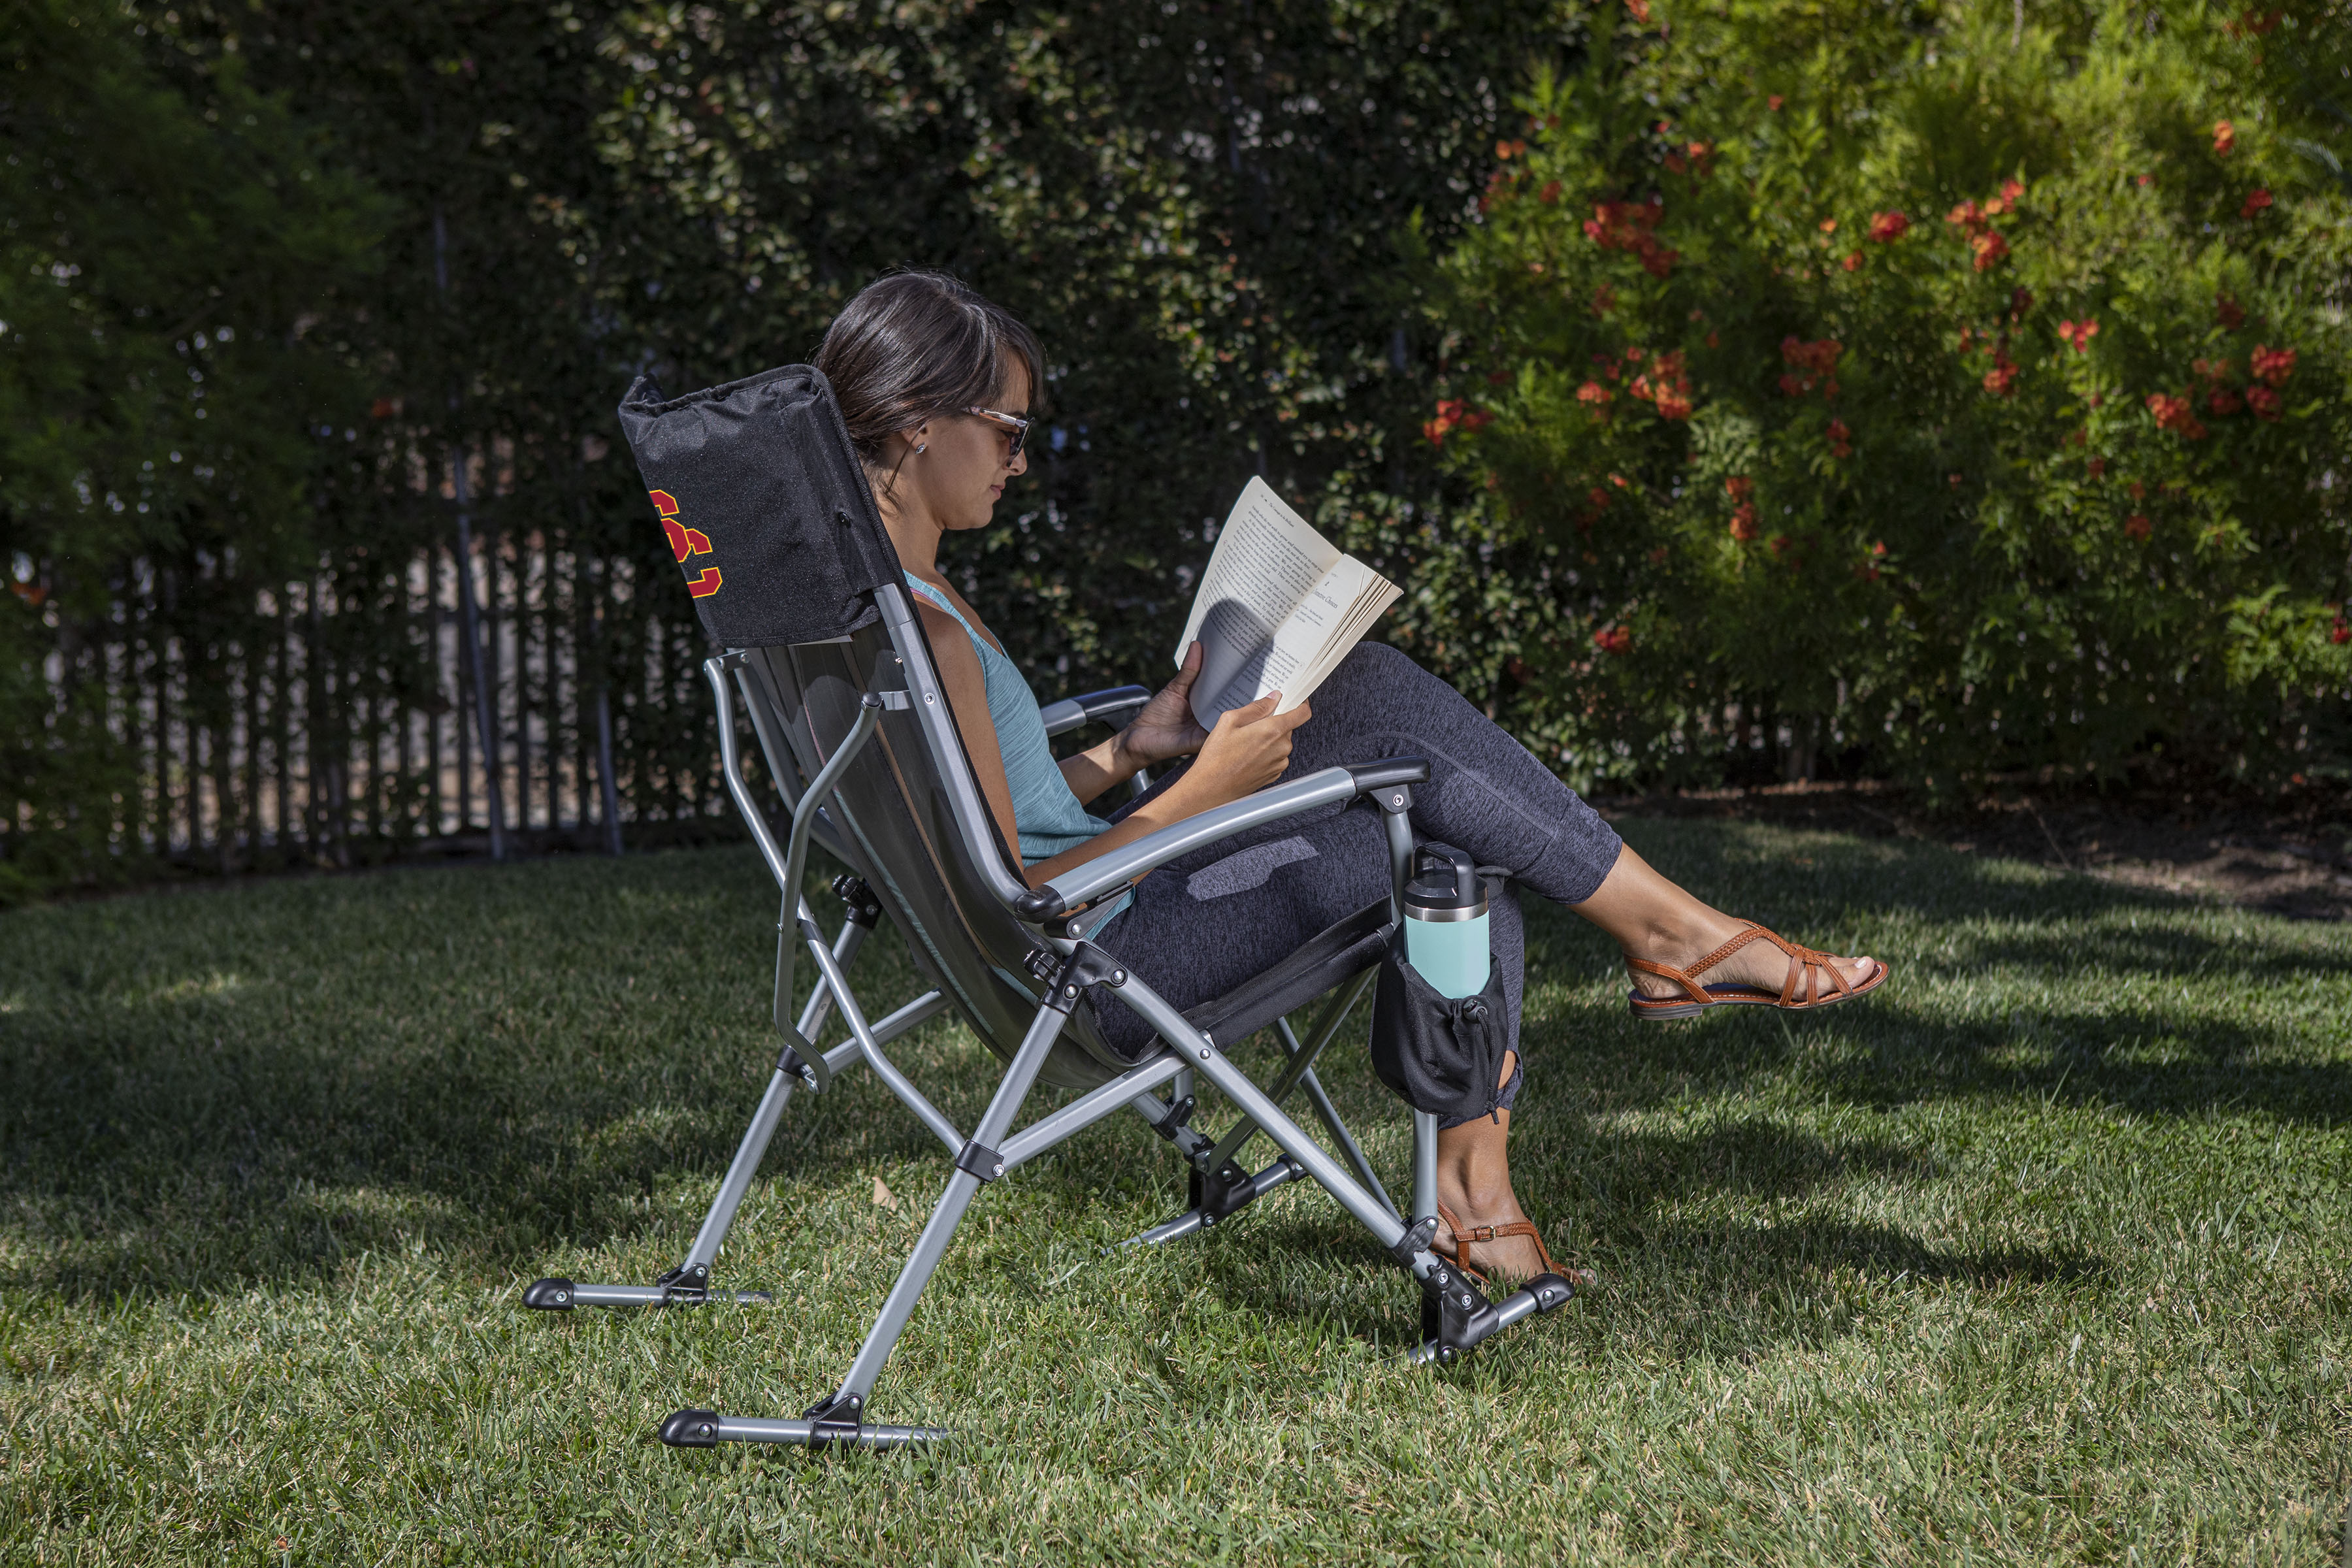 USC Trojans - Outdoor Rocking Camp Chair